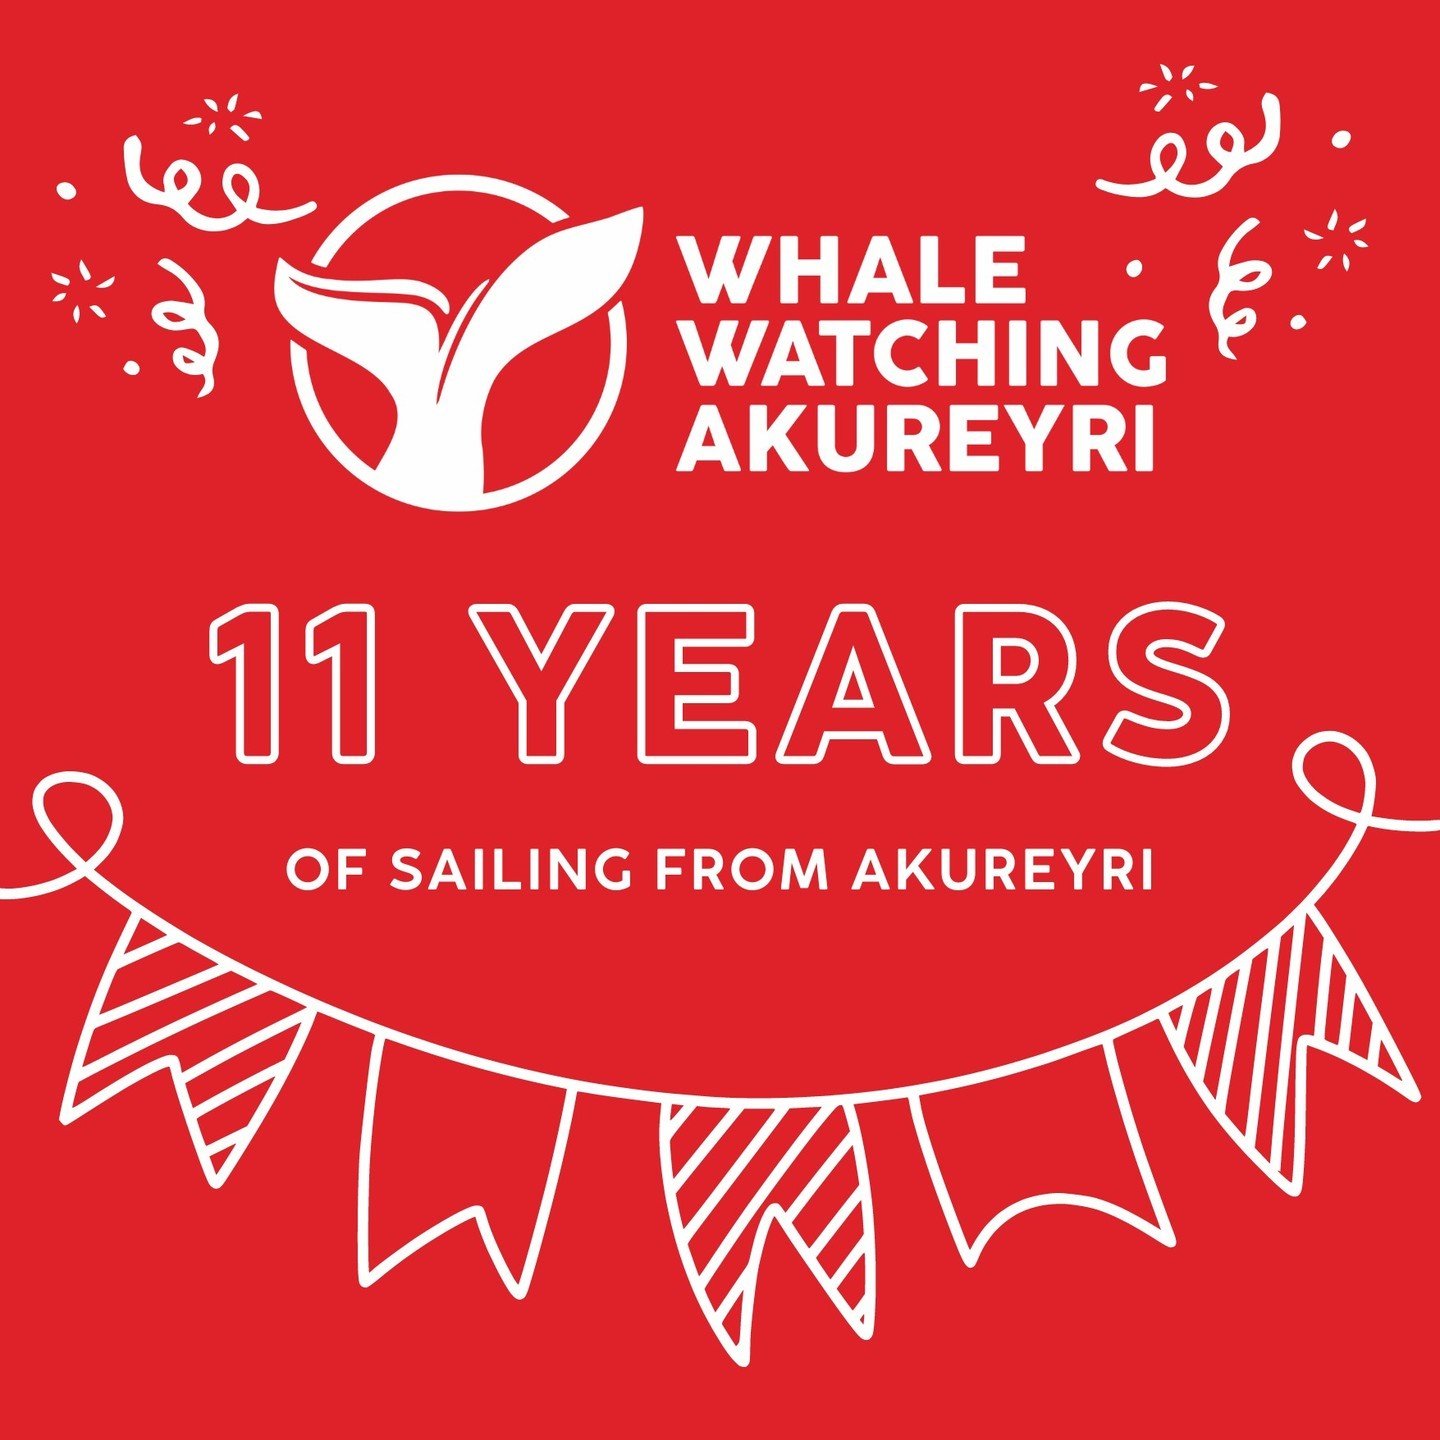 11 years ago on 15th of May 2013 our boat Ambassador has sailed out for the first time in Eyjafjordur! Since then we have encountered variety of species of whales, made some fascinating discoveries, recognized over 500 Humpback whales in the area and